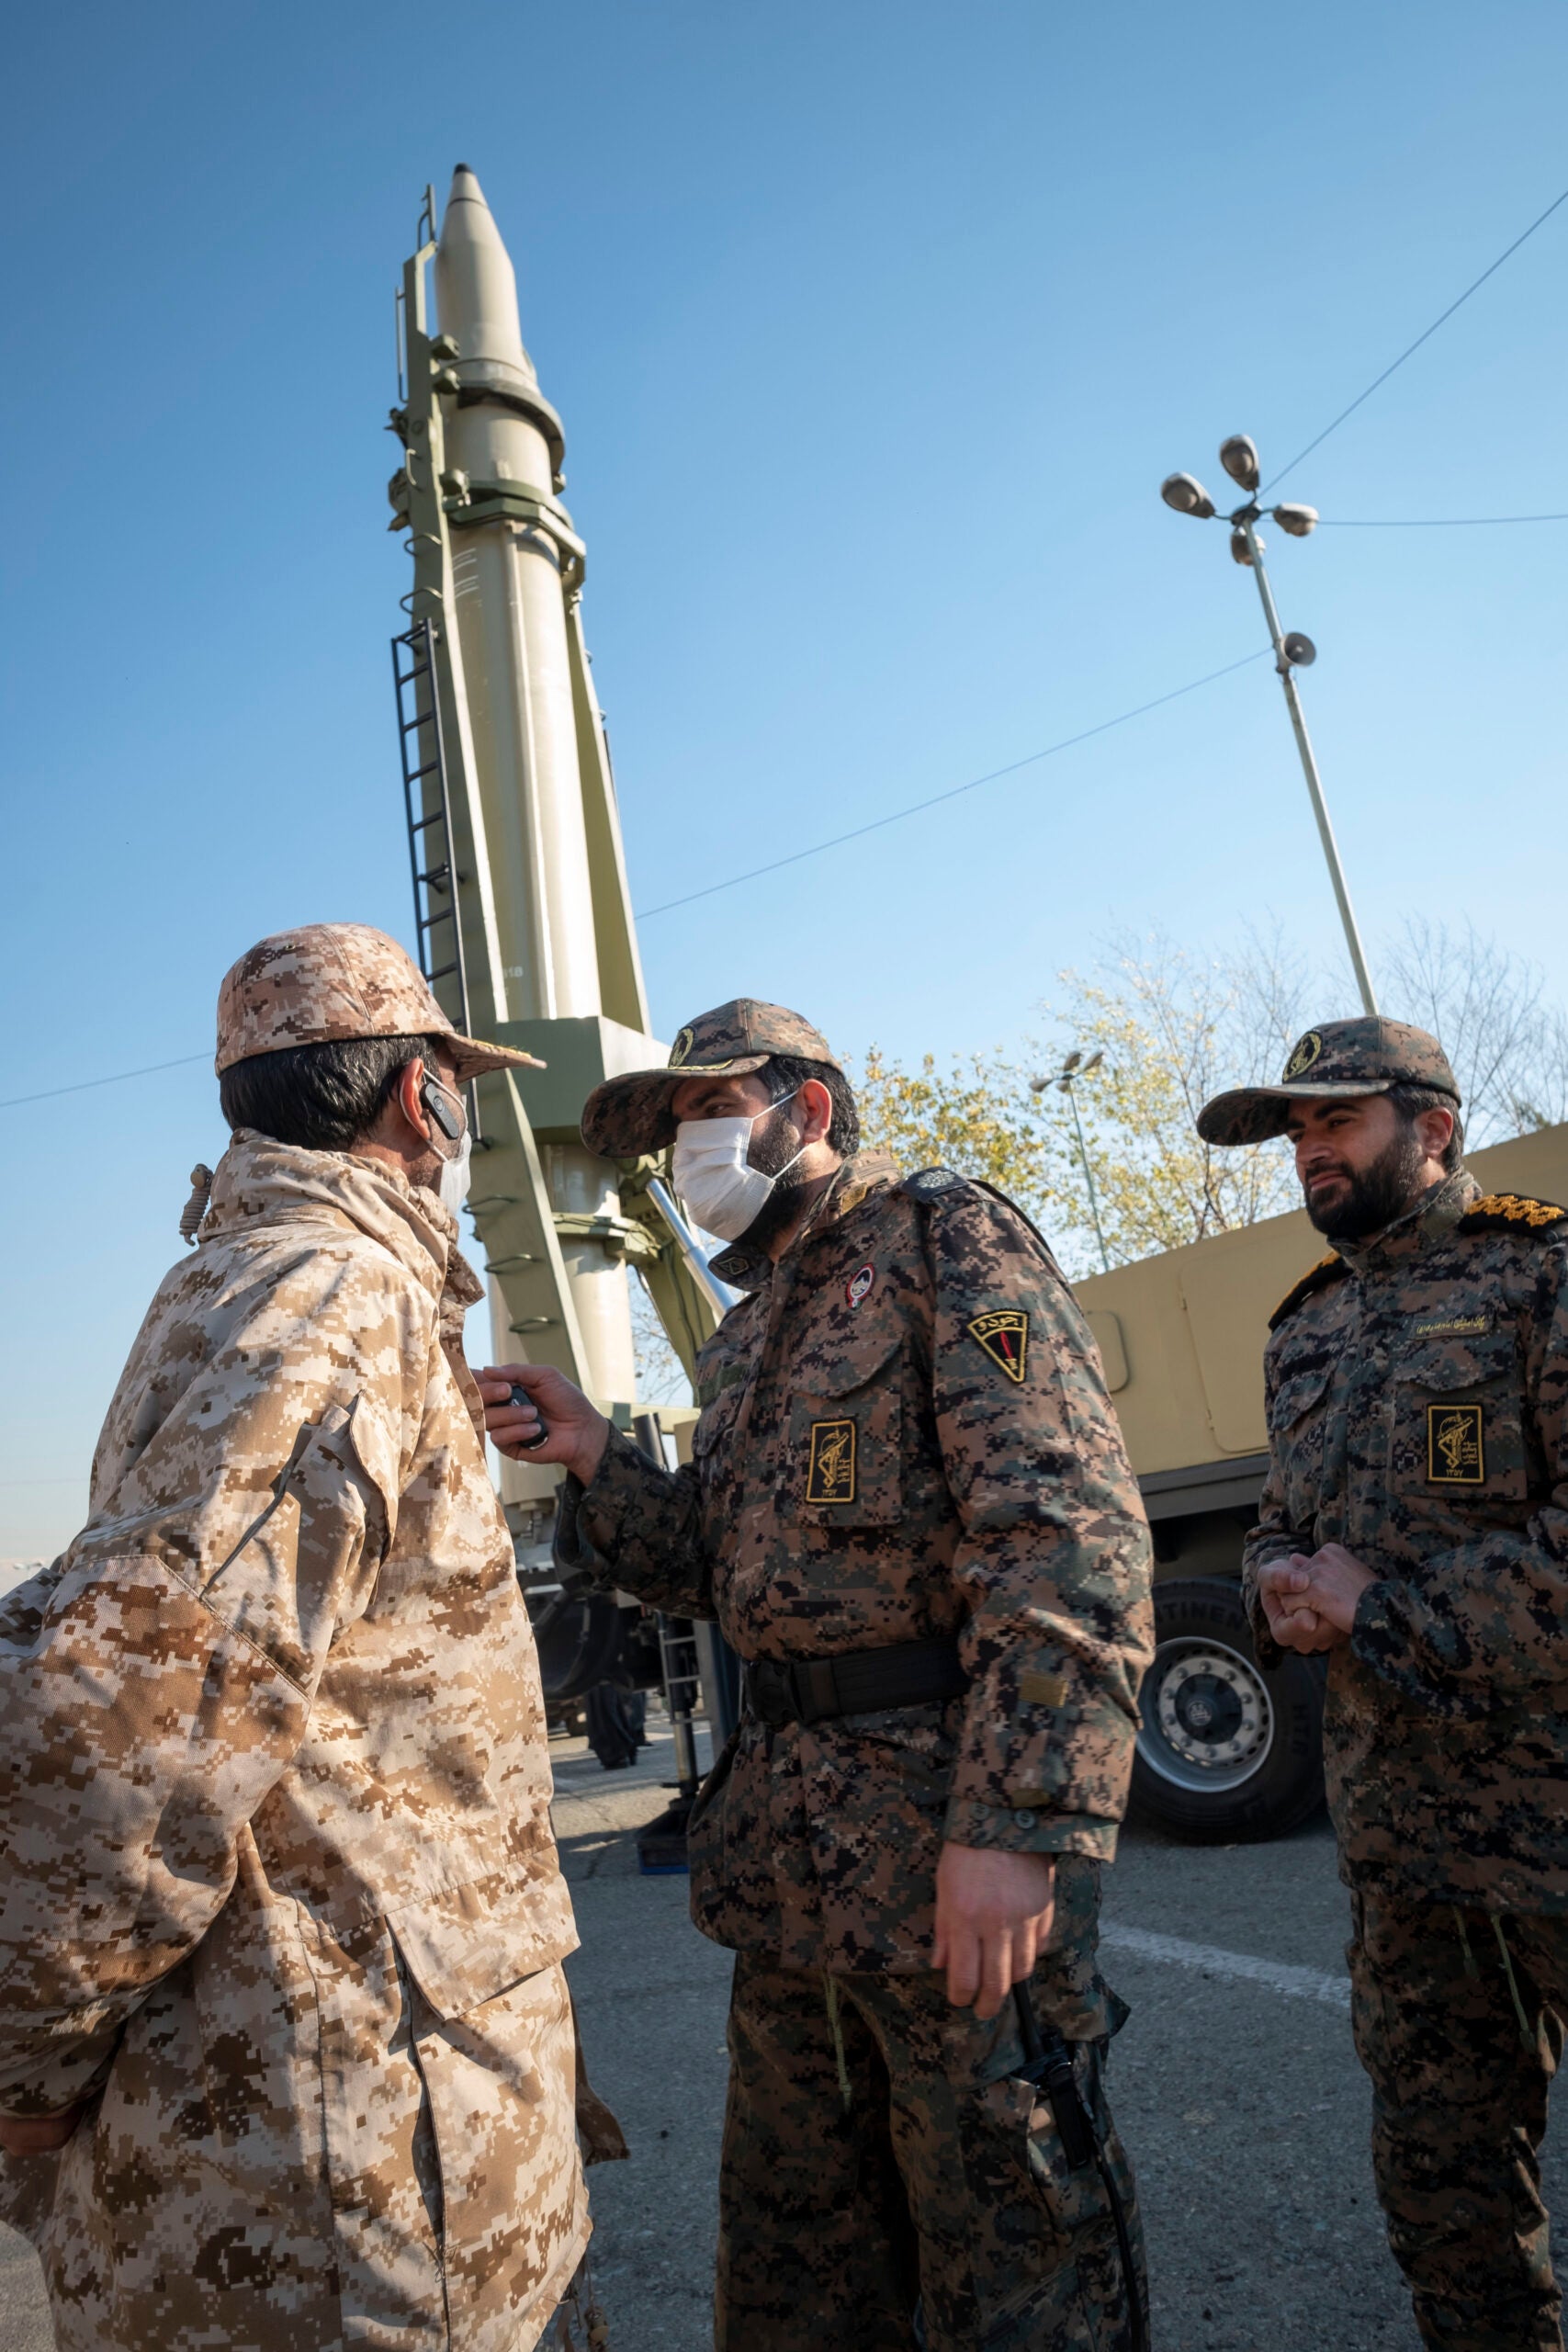 Islamic Revolutionary Guard Corps (IRGC) military personnel talk to each other as an Iranian Qiam short-range surface-to-surface ballistic missile is displayed in a military exhibition to mark the anniversary of an Iran missile attack on the U.S. Ain al-Assad airbase in Iraq in revenge for killing the former commander of the IRGC Quds Force, General Qasem Soleimani, at the Imam Khomeini Grand Mosque in downtown Tehran on January 7, 2022. Irans Aerospace Force of the Islamic Revolutionary Guard Corps (IRGC) has attacked the U.S. military airbase in revenge for killing the former commander of the IRGC Quds Force, General Qasem Soleimani, who has been killed in a U.S. drone attack in Baghdad International Airport in Iraq in 2020, with surface-to-Surface missiles.  (Photo by Morteza Nikoubazl/NurPhoto via Getty Images)